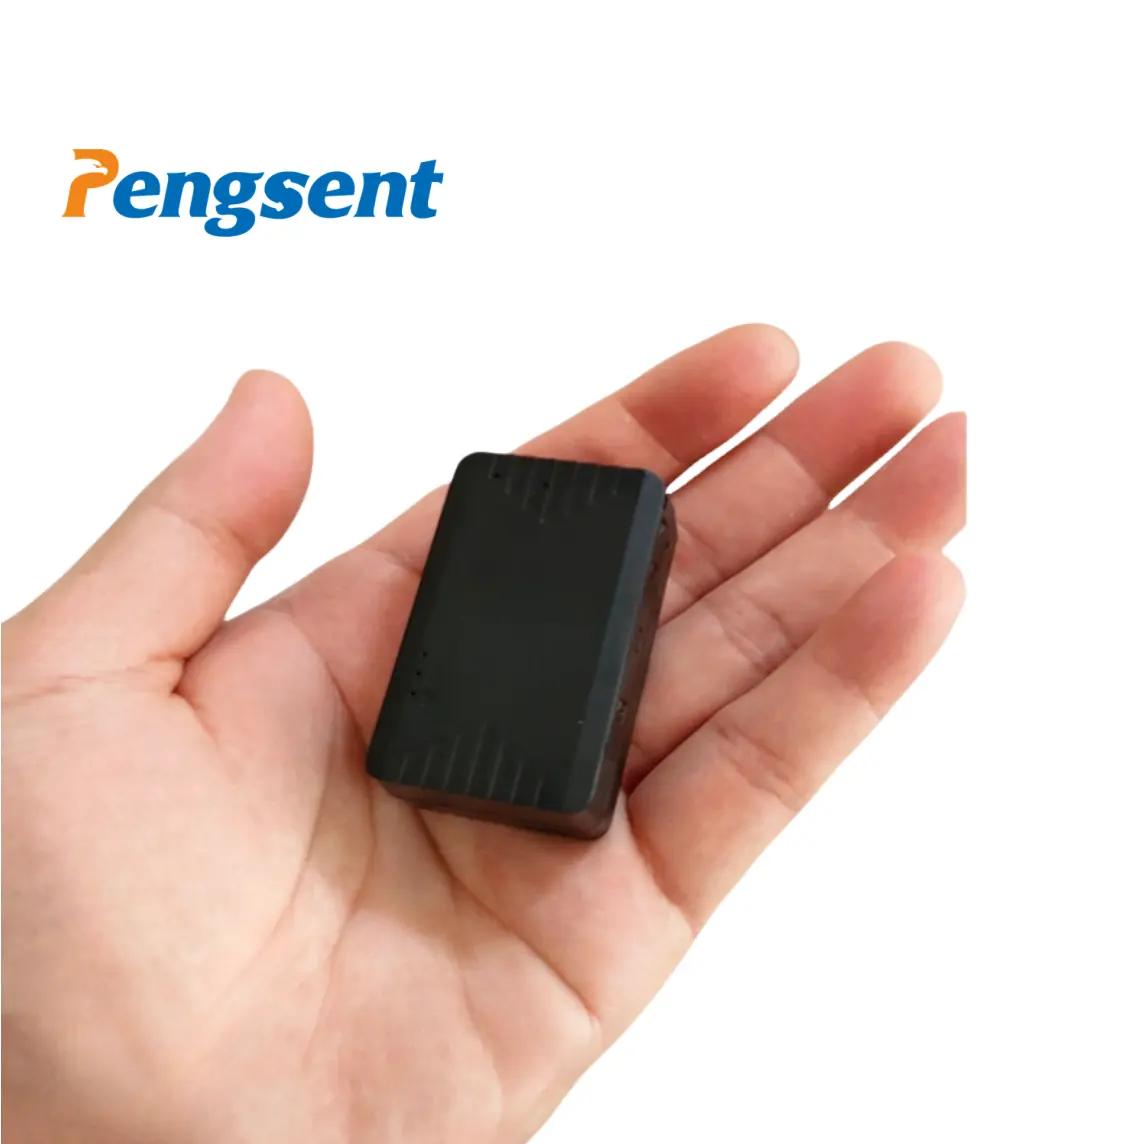 Pengsent FM03H 4g New Arrival Competitive Price Android Gps Tracker Micro Gps Tracker Magnetic Gps Tracker